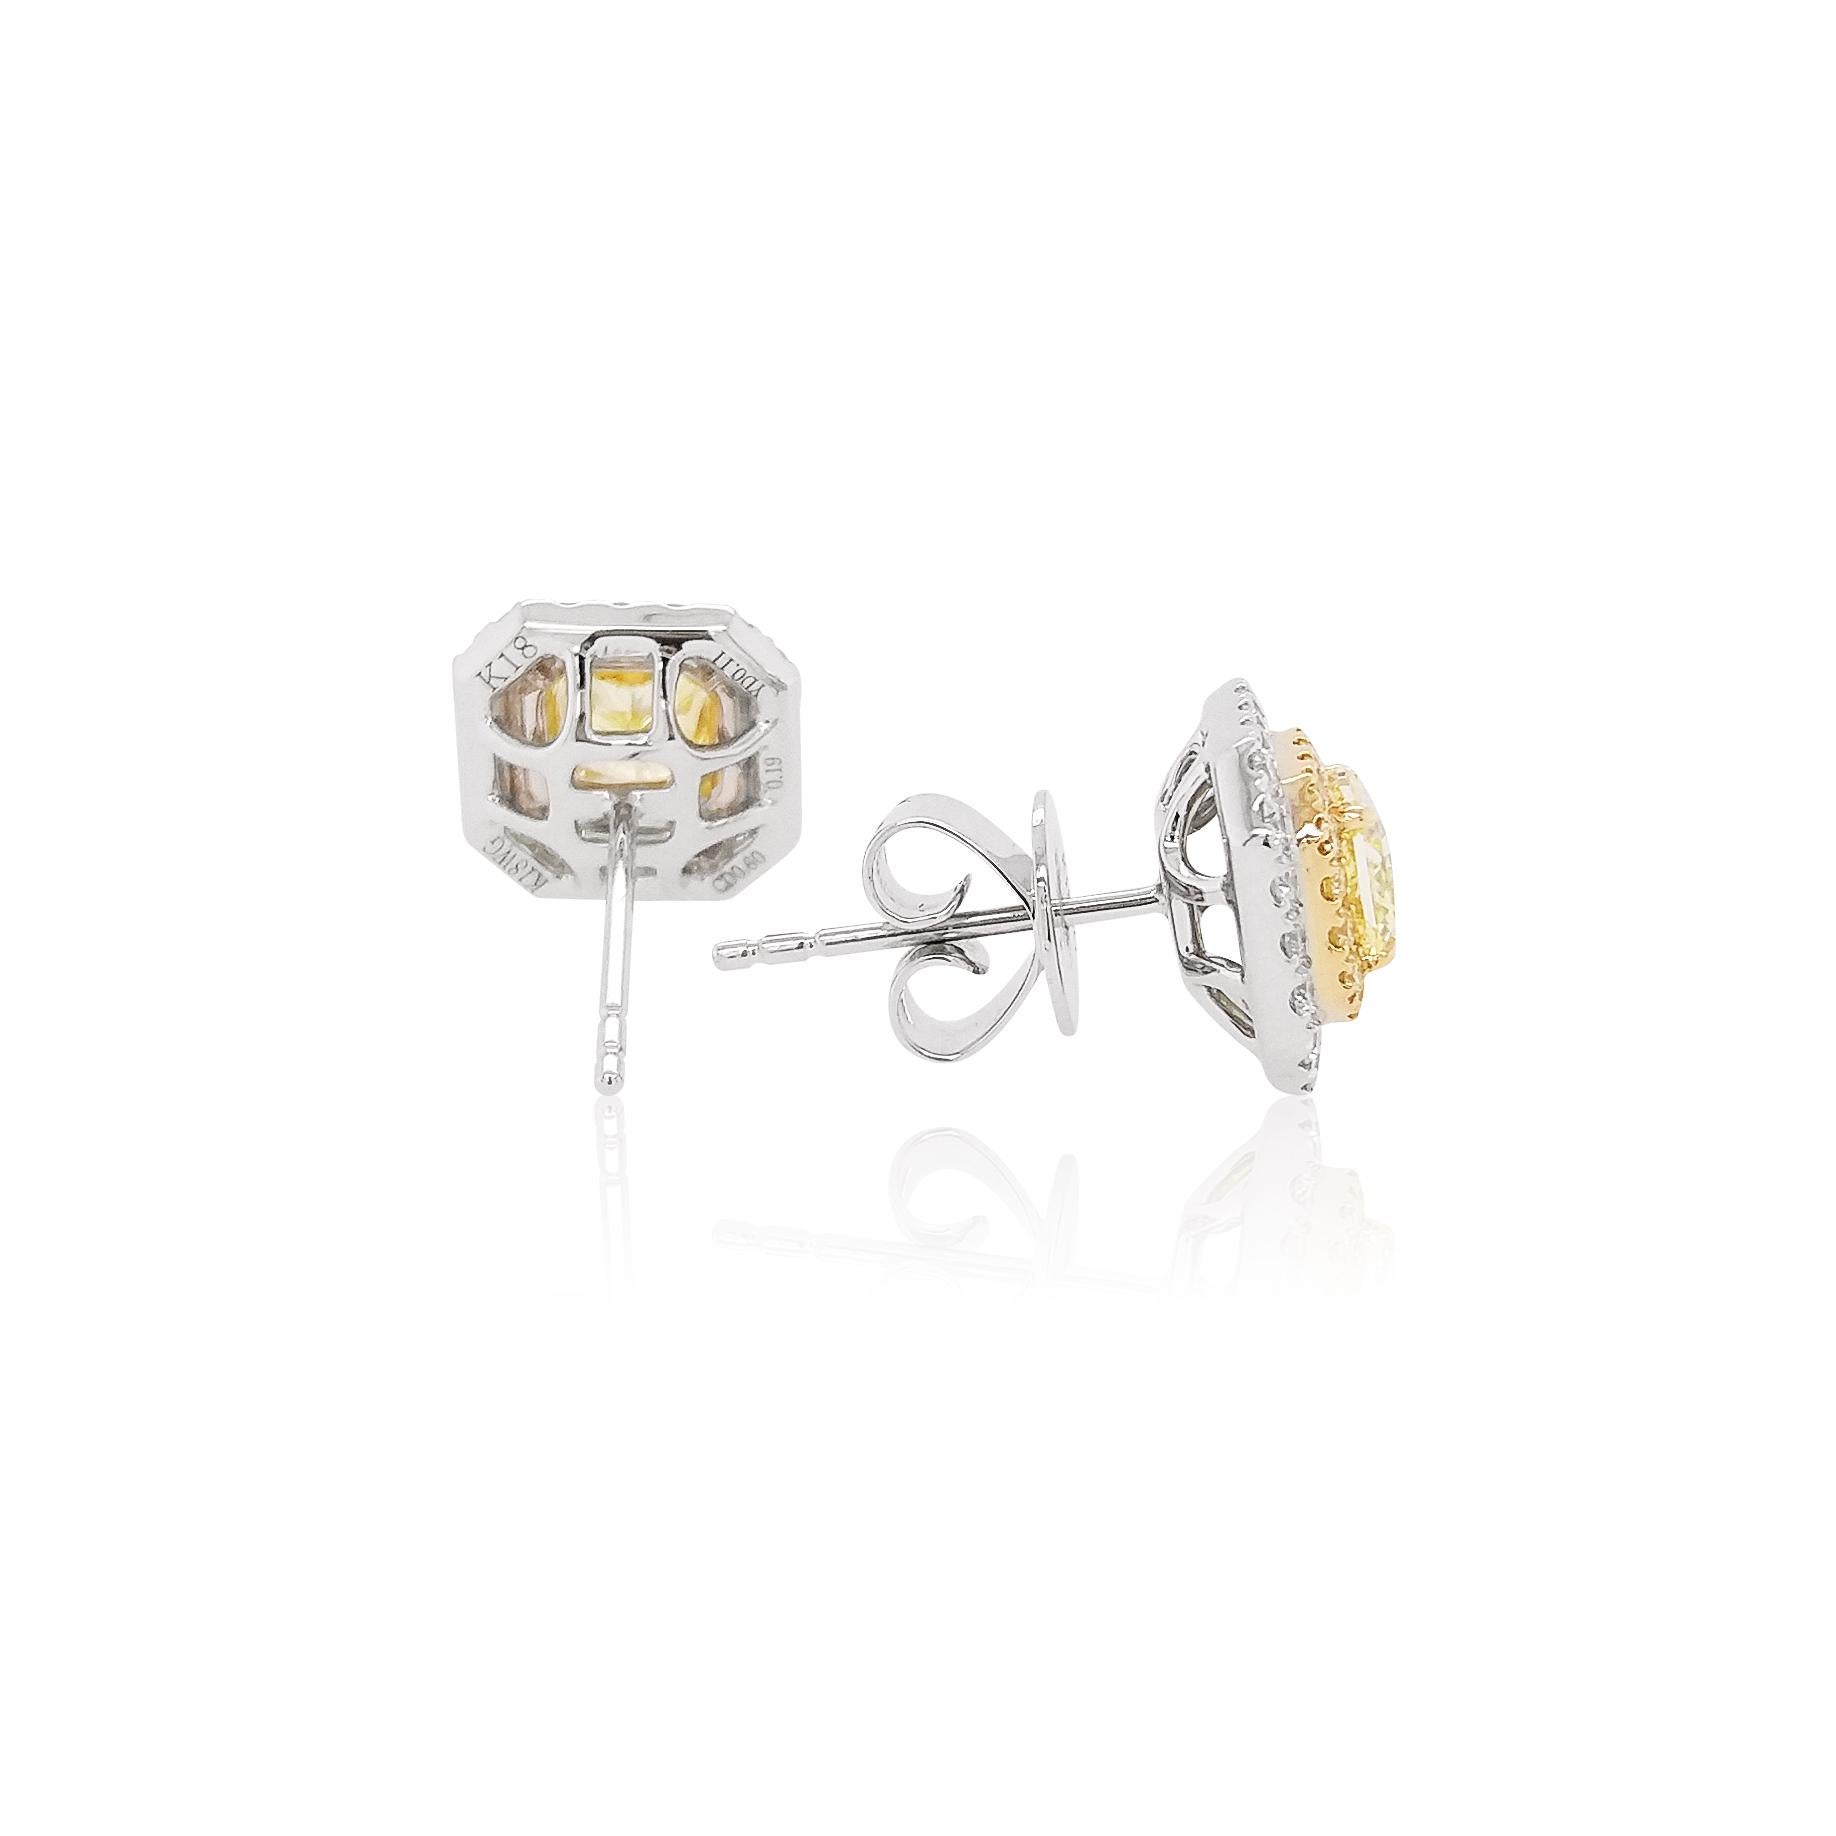 Contemporary GIA Certified Fancy Yellow Diamond and White Diamond 18K Gold Stud Earrings